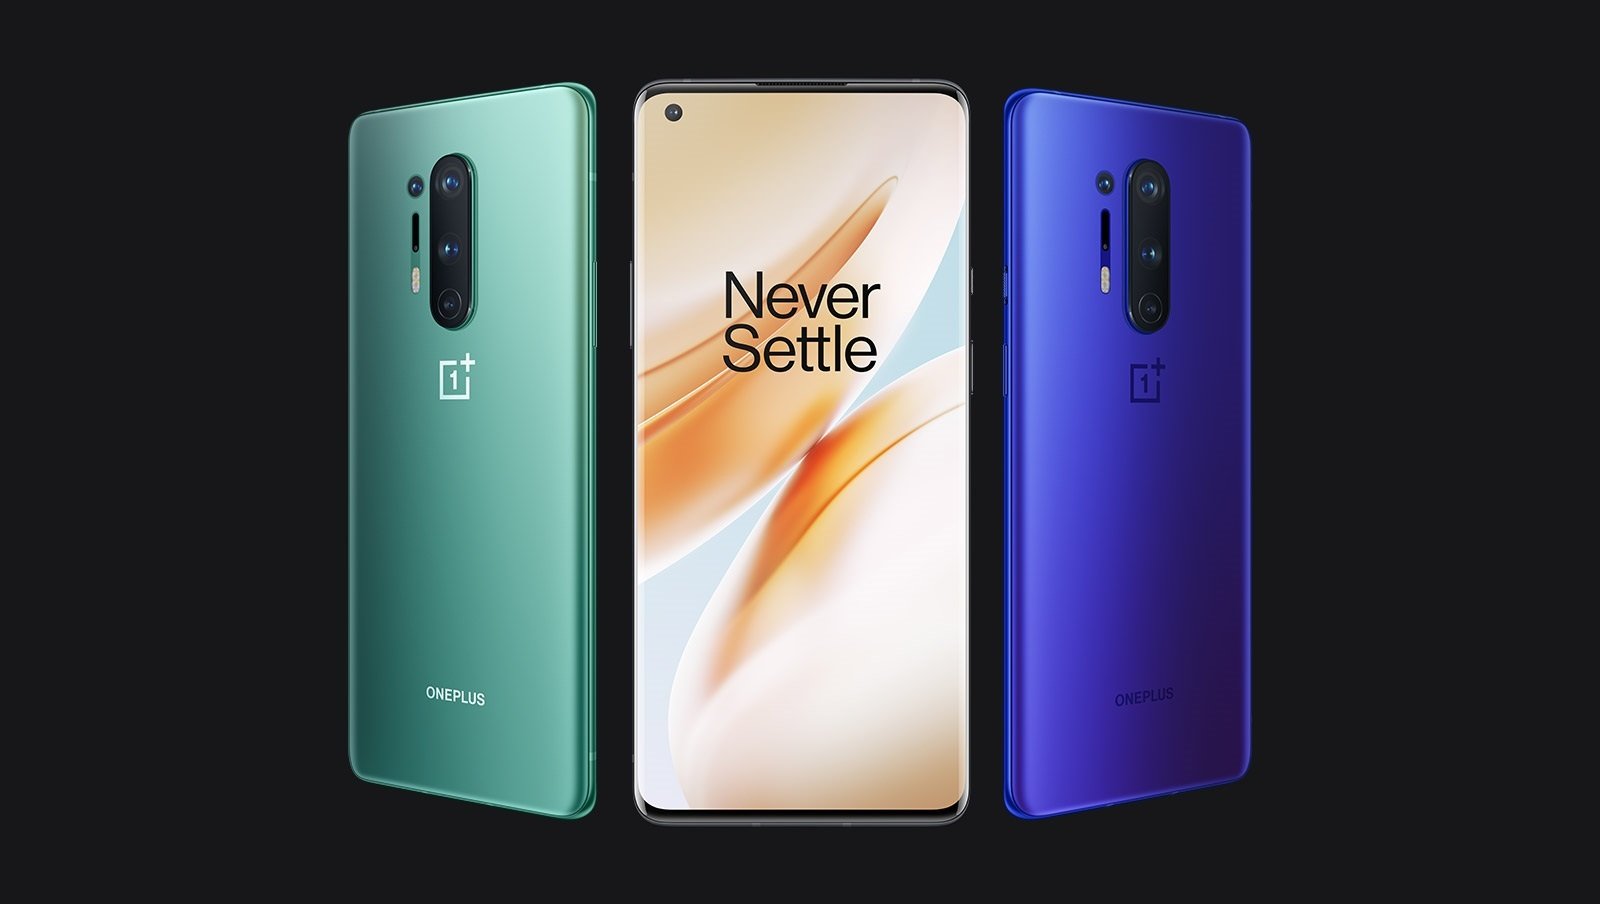 The newest OnePlus 8 series came with a different price tag for Western countries than for India and China. (Picture: OnePlus)